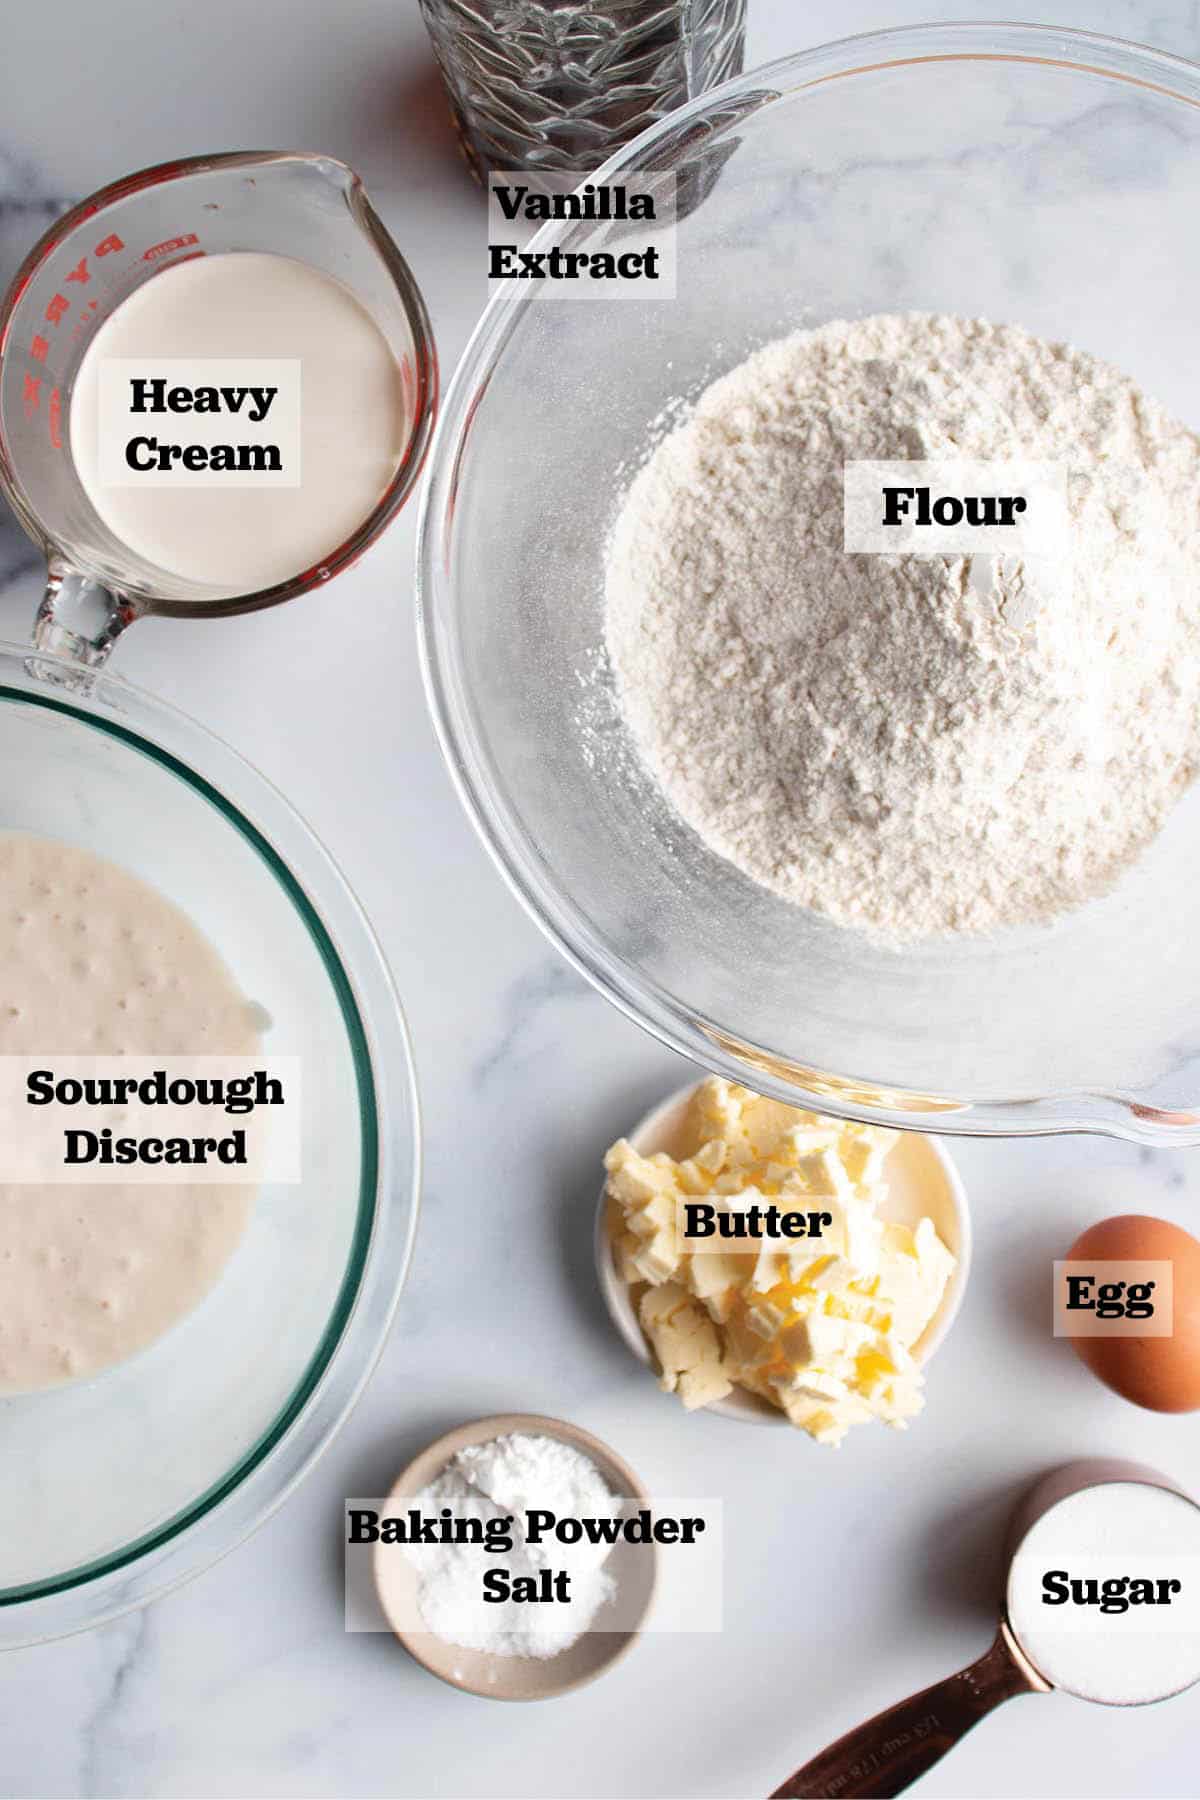 Ingredients for scones laid out in bowls and measuring cups. Vanilla extract, heavy cream, flour, sourdough discard butter, egg, sugar, baking powder and salt. 